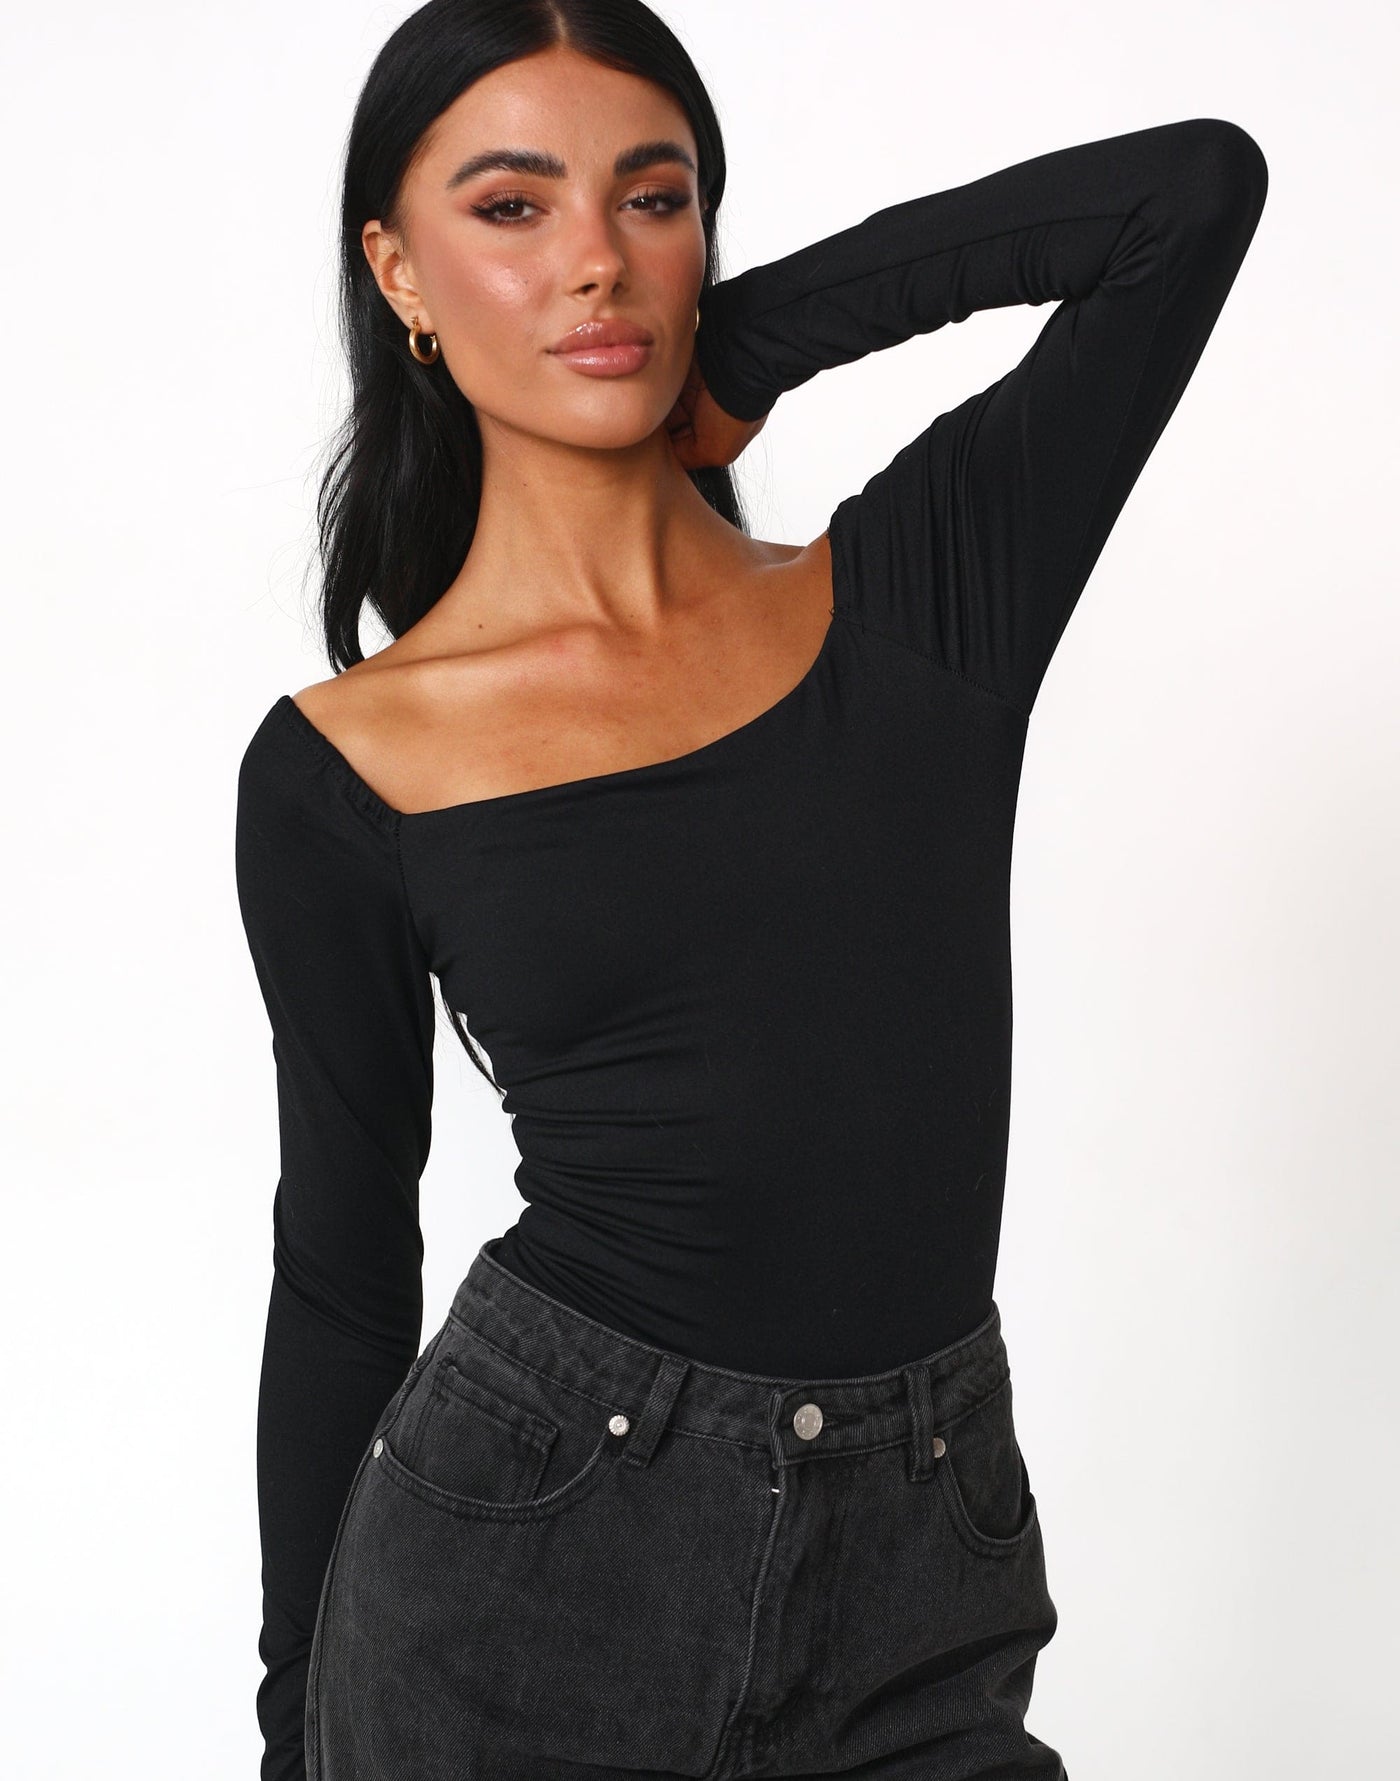 Monae Long Sleeve Bodysuit (Black) - Low Back Fitted Bodycon Bodysuit - Women's Top - Charcoal Clothing